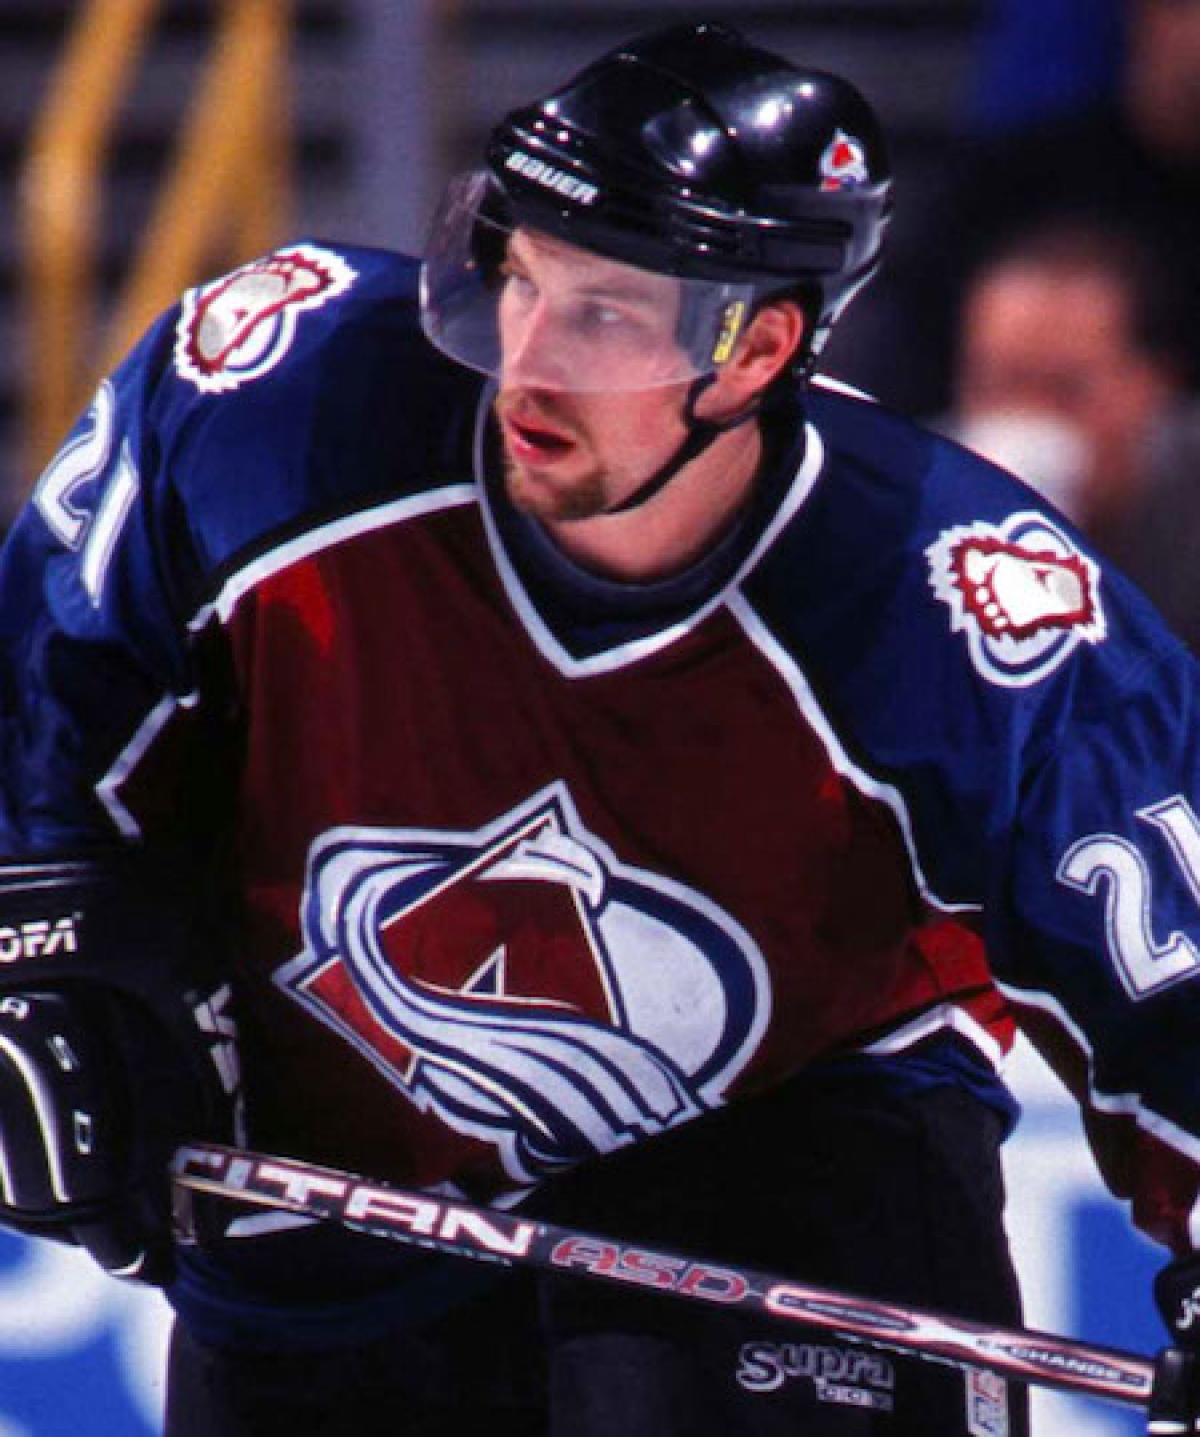 2001 Colorado Avalanche Peter Forsberg Stanley Cup Finals Hockey